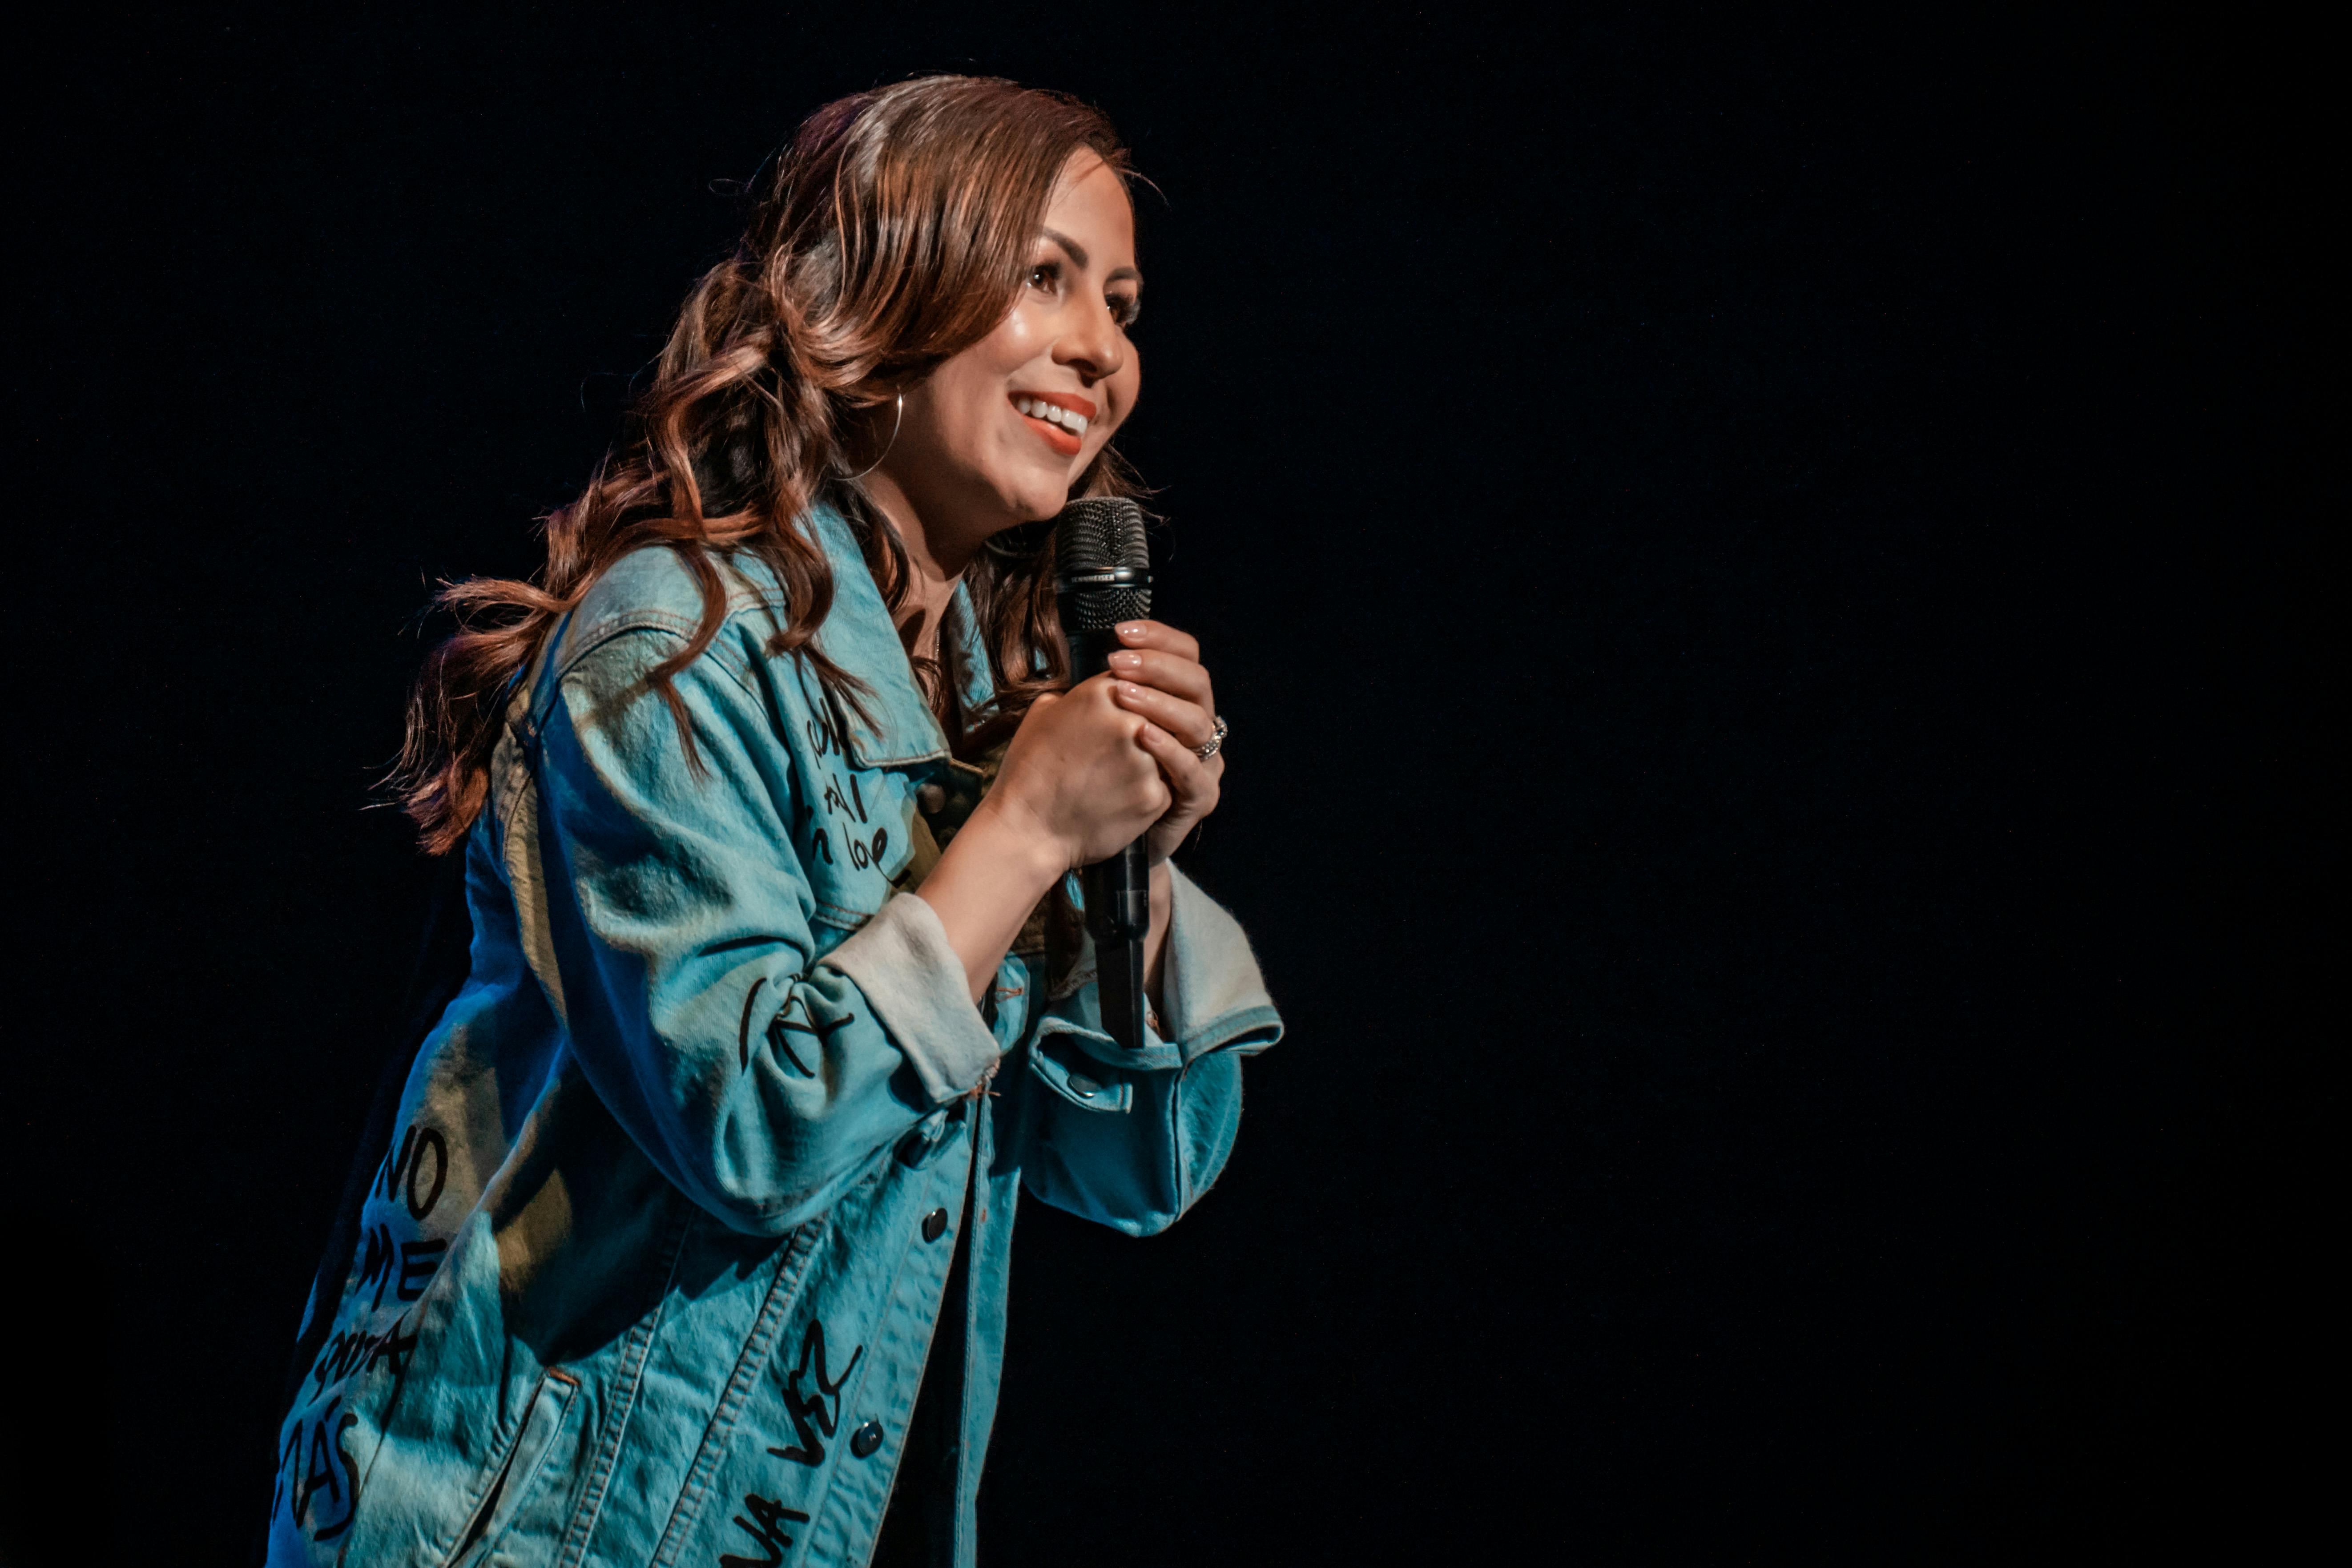 LAUGH OUT LOUD WITH ANJELAH JOHNSON-REYES AT RIVERS CASINO PORTSMOUTH